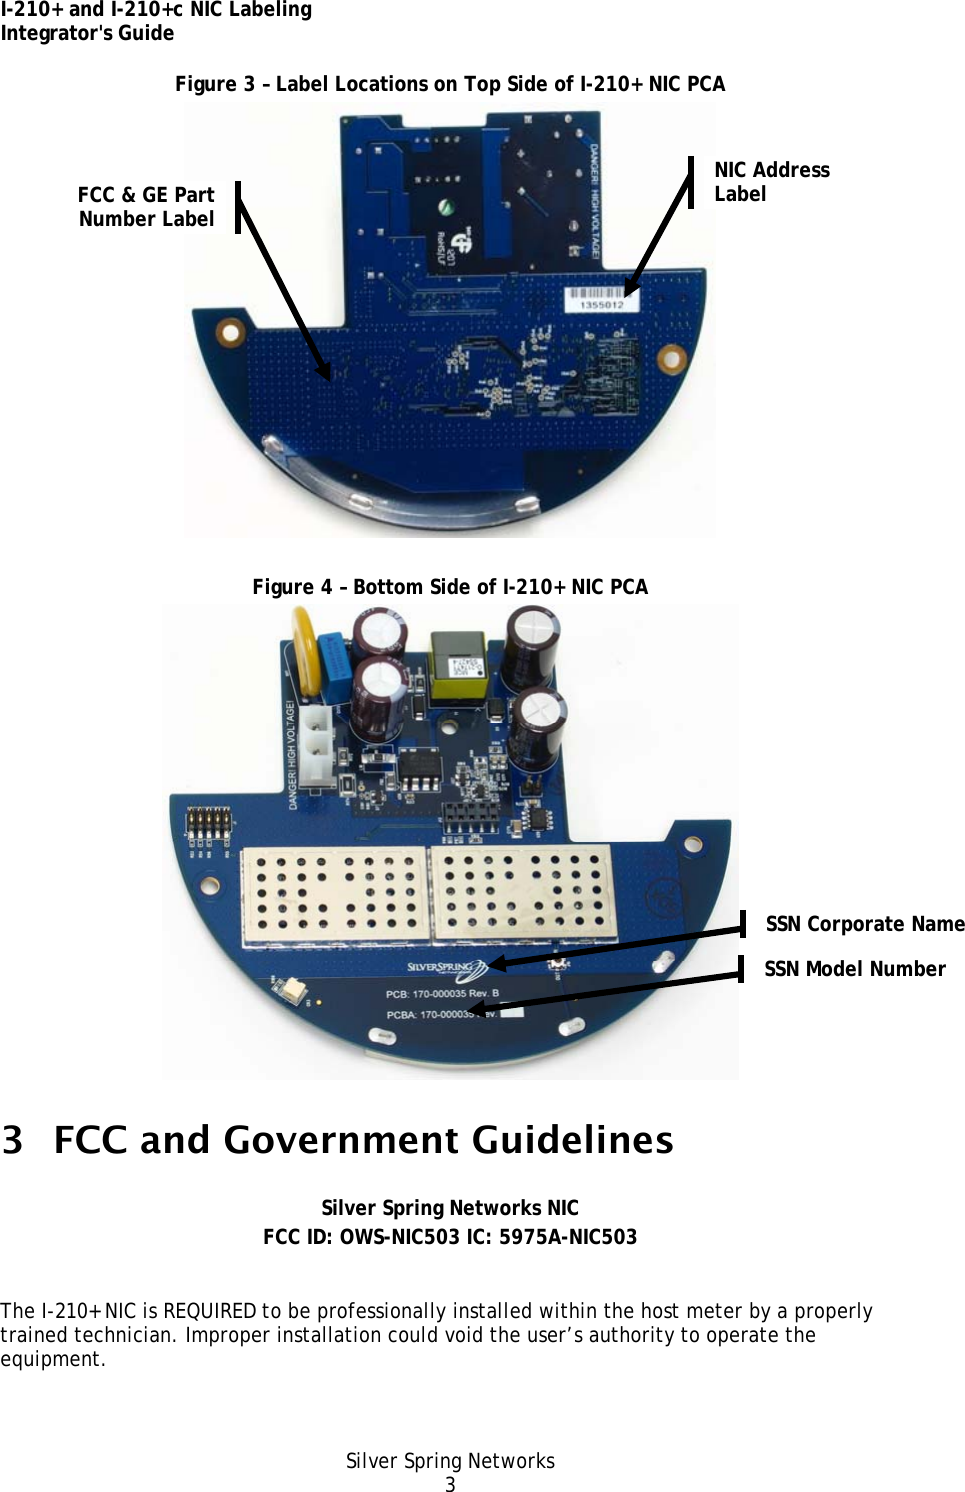 I-210+ and I-210+c NIC Labeling Integrator&apos;s Guide Silver Spring Networks 3 Figure 3 – Label Locations on Top Side of I-210+ NIC PCA  Figure 4 – Bottom Side of I-210+ NIC PCA  3 FCC and Government Guidelines  Silver Spring Networks NIC FCC ID: OWS-NIC503 IC: 5975A-NIC503  The I-210+ NIC is REQUIRED to be professionally installed within the host meter by a properly trained technician. Improper installation could void the user’s authority to operate the equipment. NIC Address Label FCC &amp; GE Part Number Label SSN Corporate Name SSN Model Number 